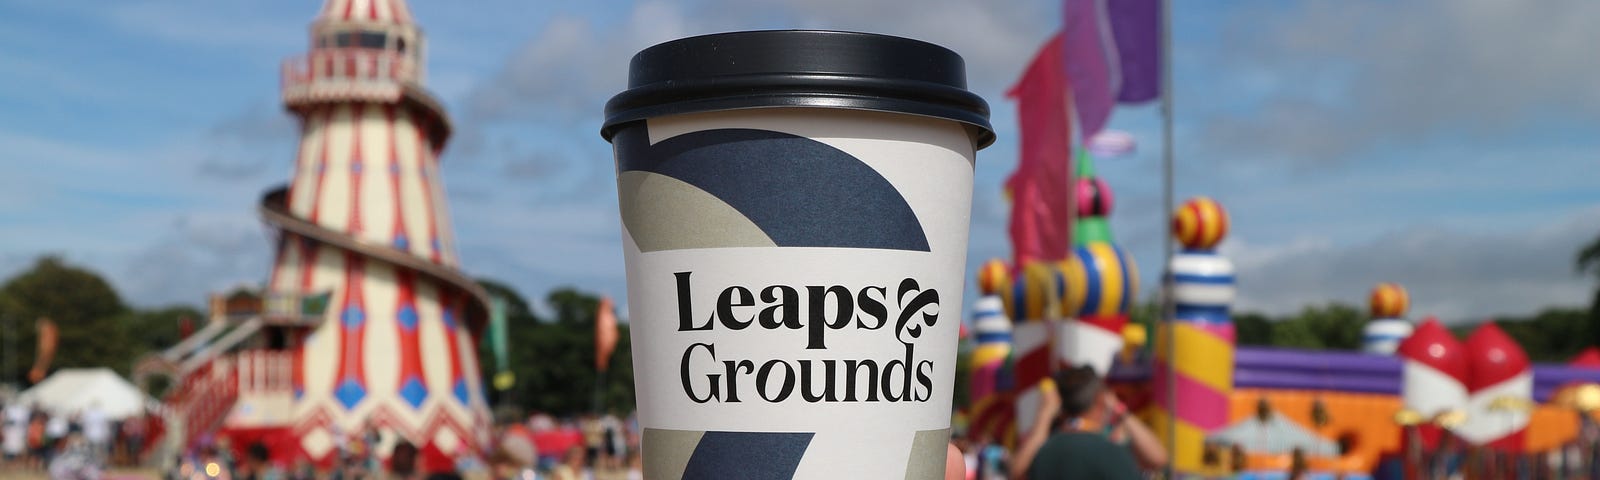 A Leaps & Grounds coffee cup in front of a blurry background showing a festival